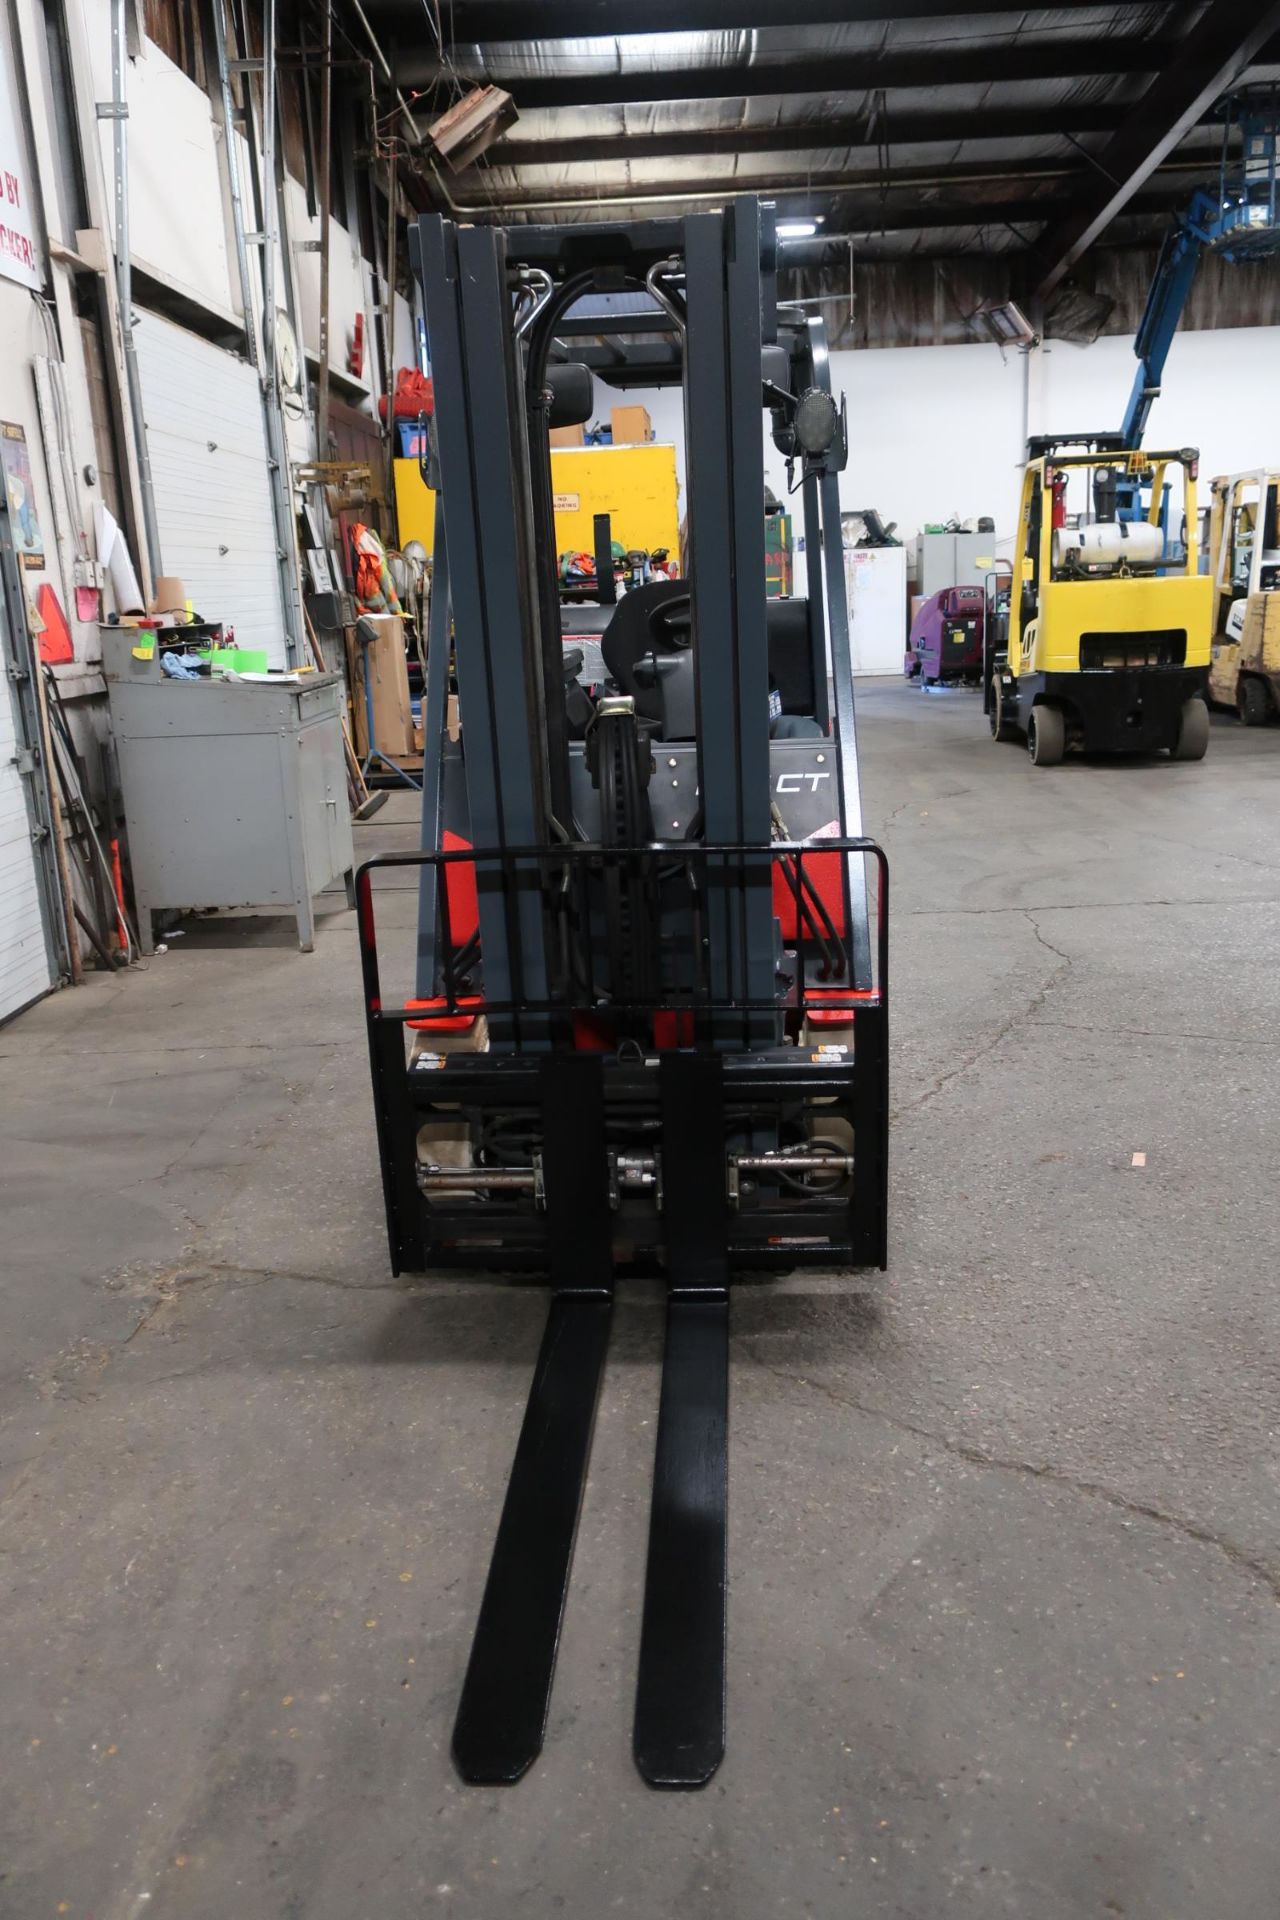 FREE CUSTOMS DOCS & 0 DUTY FEES - 2014 Linde 4700lbs Capacity Forklift with sideshift - LPG - Image 2 of 2